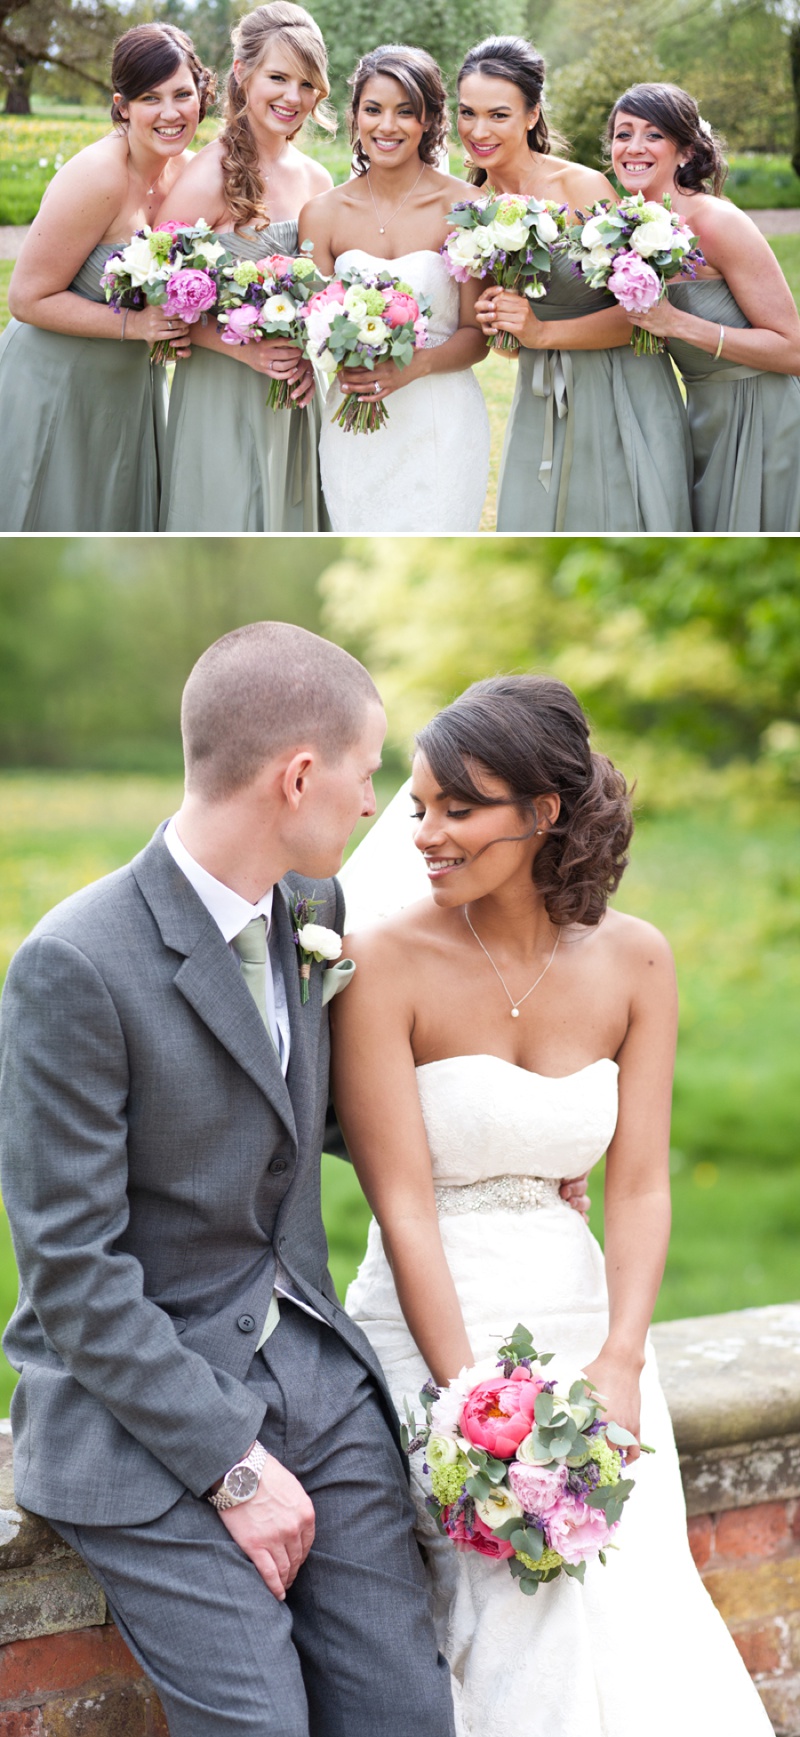 An Elegant English Country Wedding  At Iscoyd Park With A 